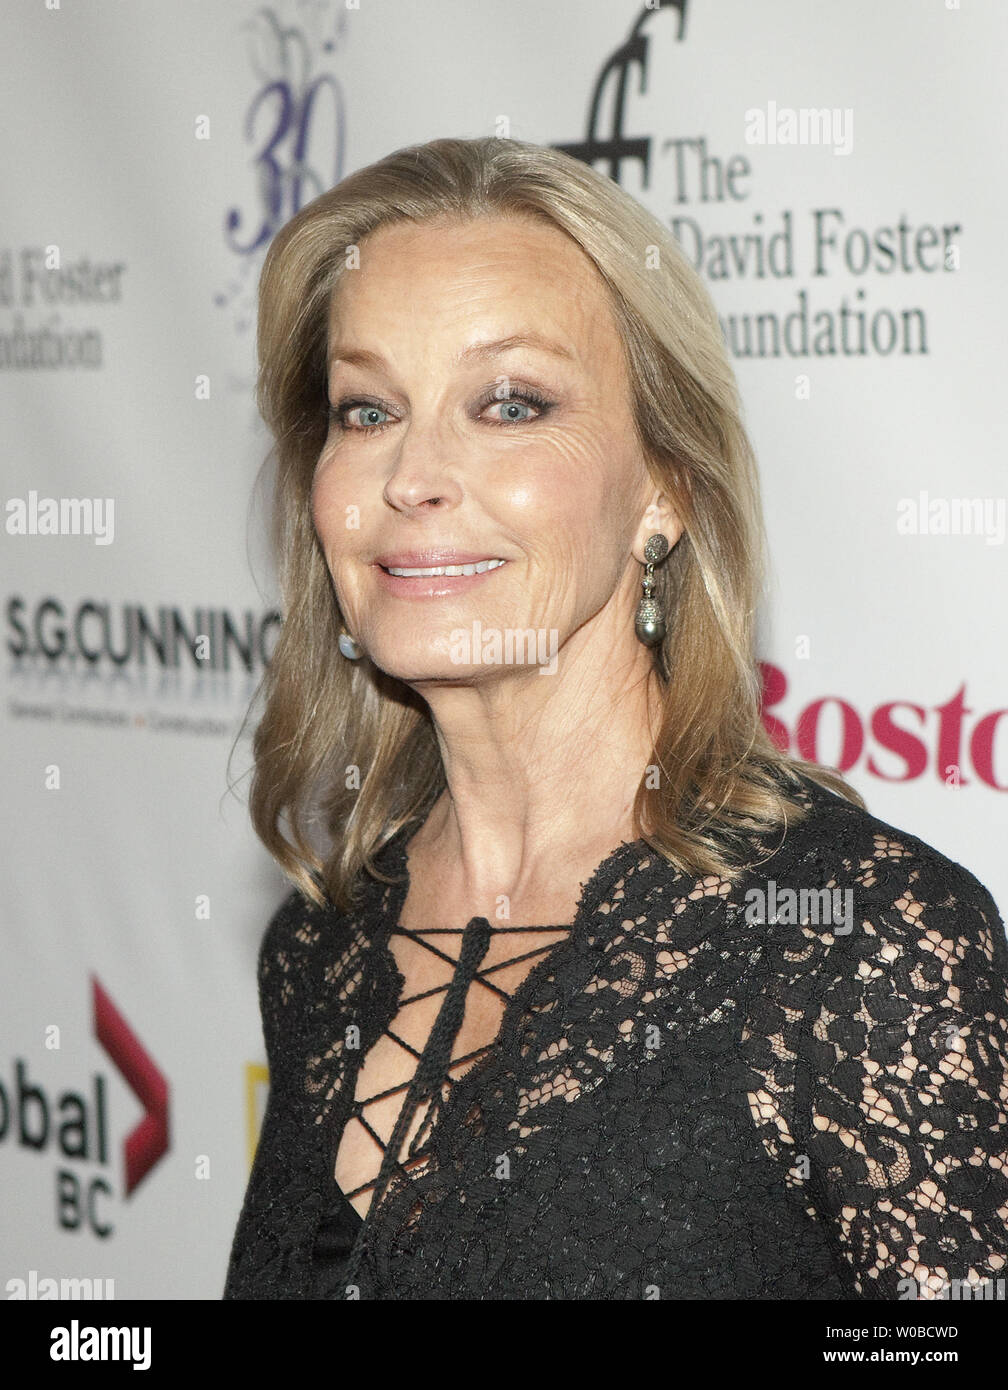 Actress Bo Derek arrives on the Red Carpet at the star studded David Foster Foundation 30th Anniversary Miracle Gala & Concert in Roger's Arena, Vancouver, BC, October 21, 2017.   UPI/Heinz Ruckemann Stock Photo